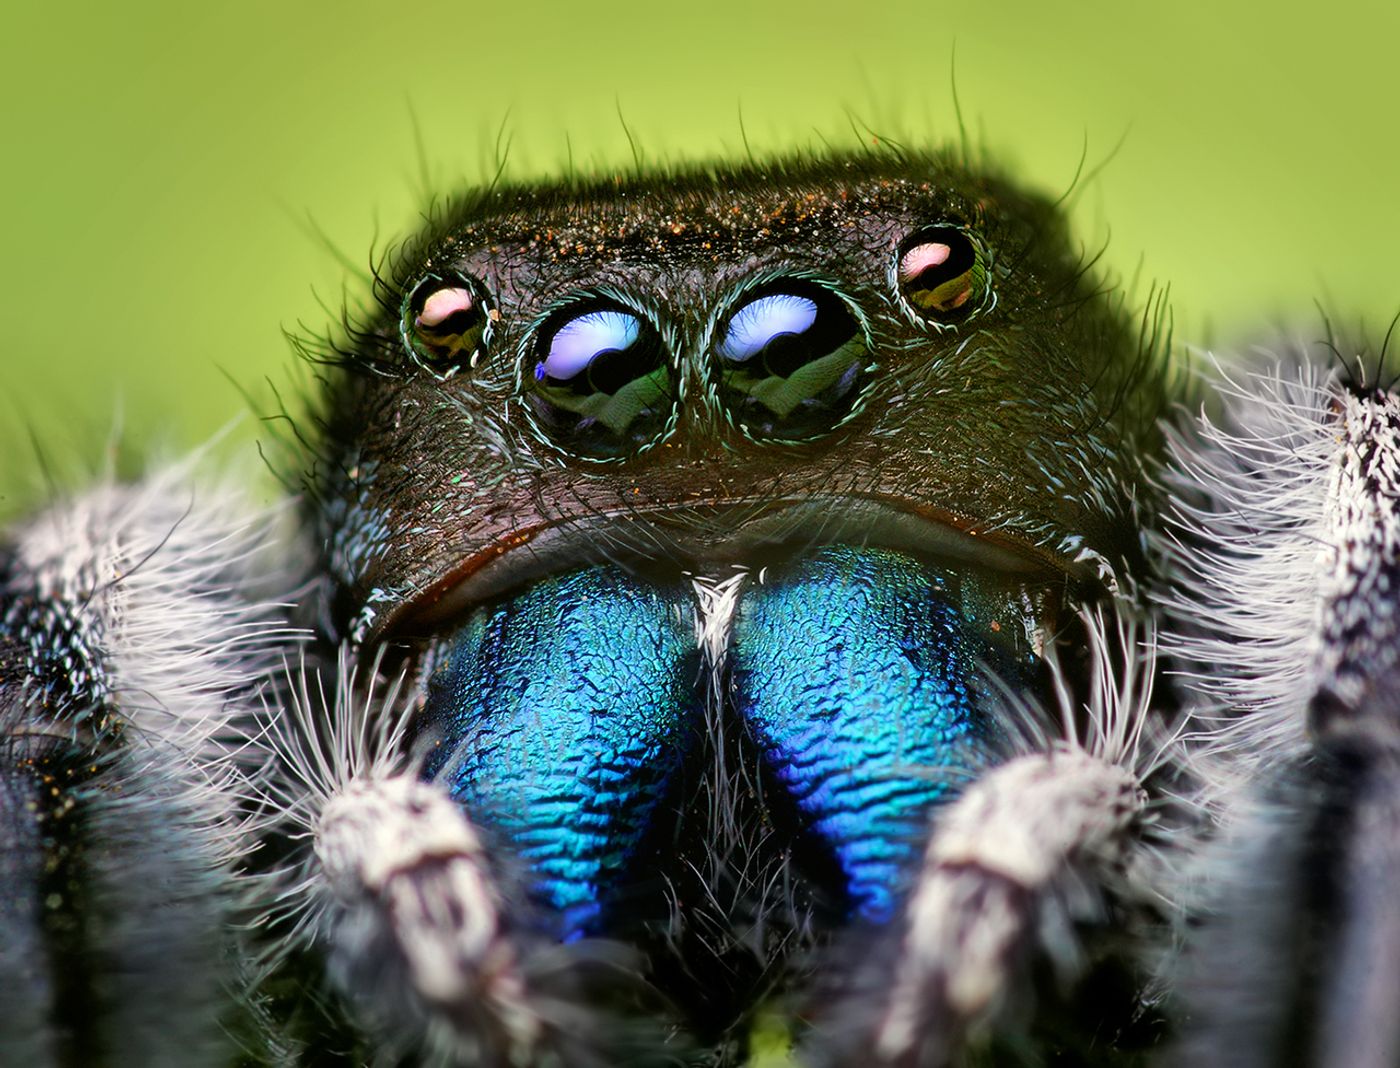 Jumping spiders are better at hearing than originally thought.